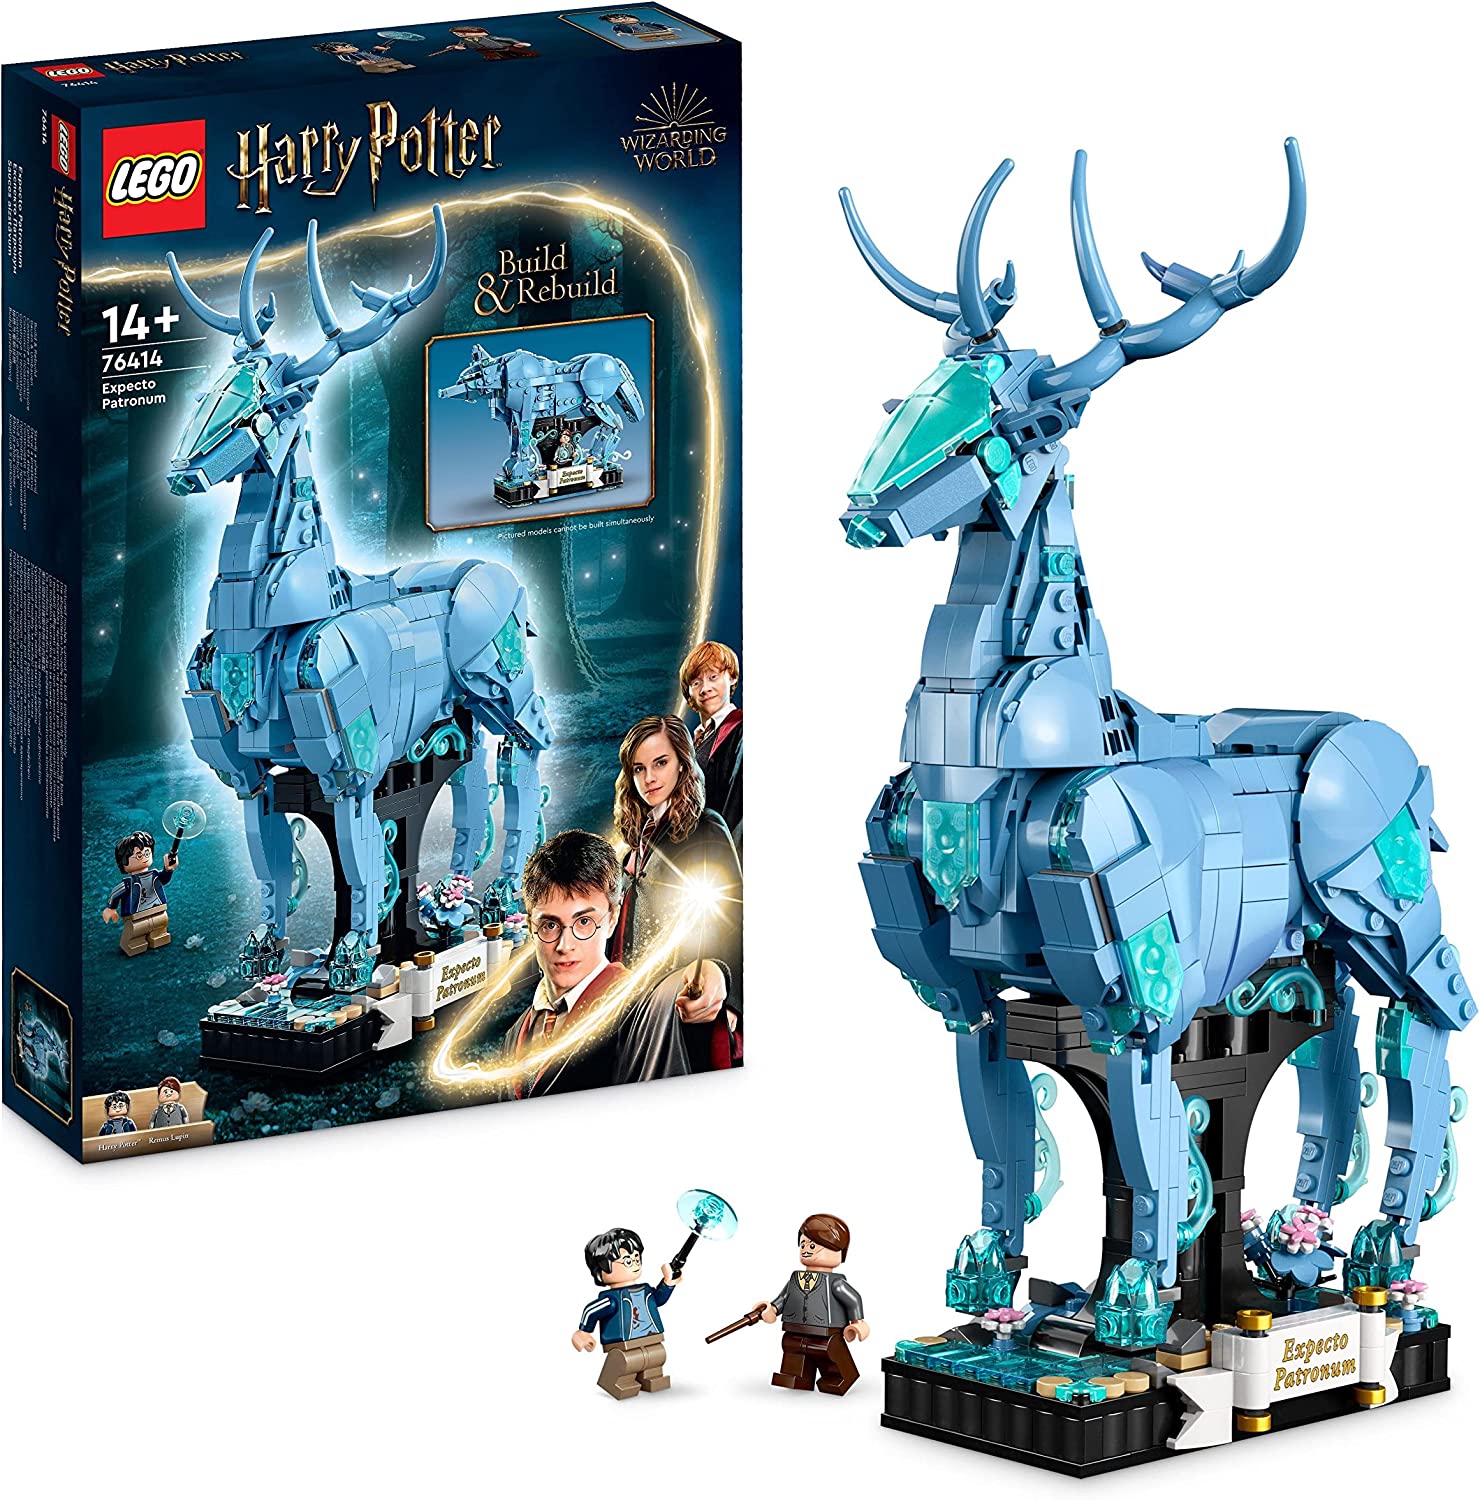 LEGO 76414 Harry Potter Expecto Patronum, 2 in 1 Deer and Wolf Figure, 2 in 1 figure set, Collectable, Building and Decoration, Gift and Accessories for Teens, Men and Women